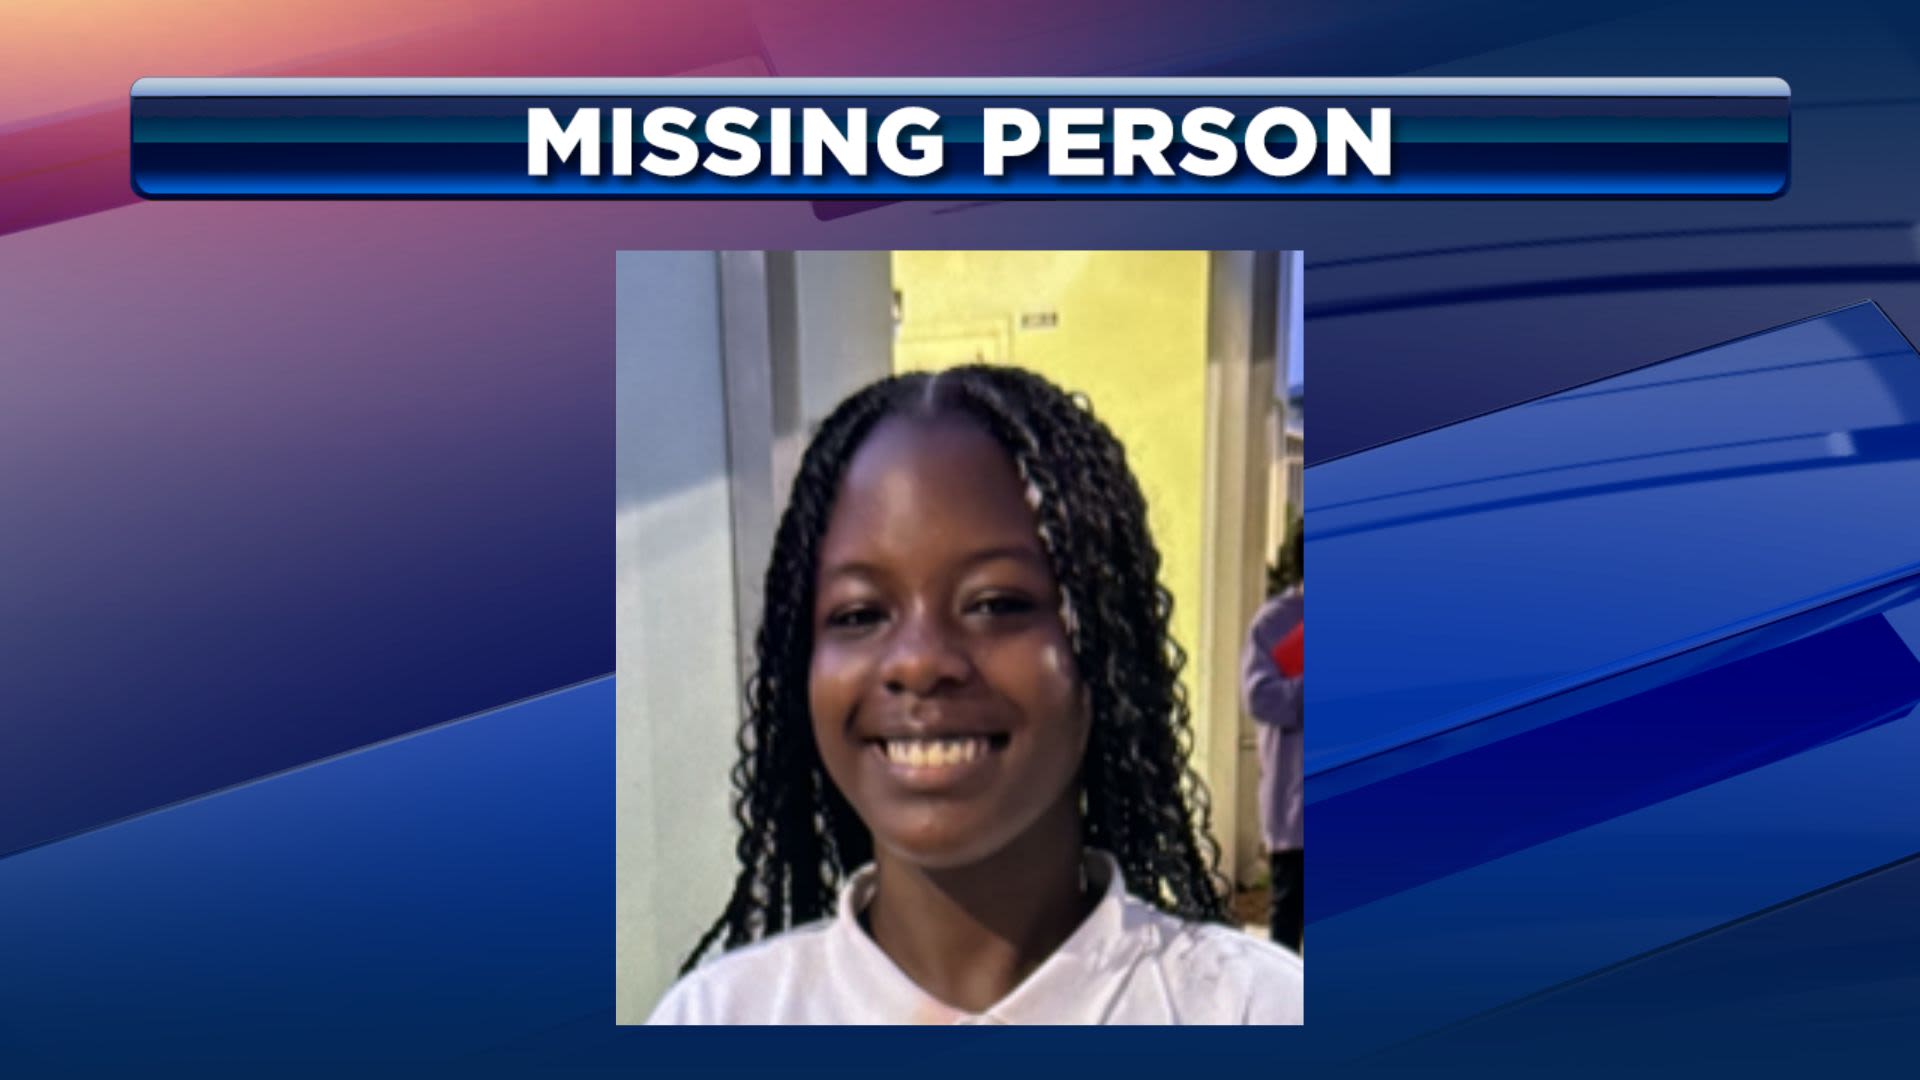 12-year-old Miami Gardens girl found safe after missing child alert issued - WSVN 7News | Miami News, Weather, Sports | Fort Lauderdale